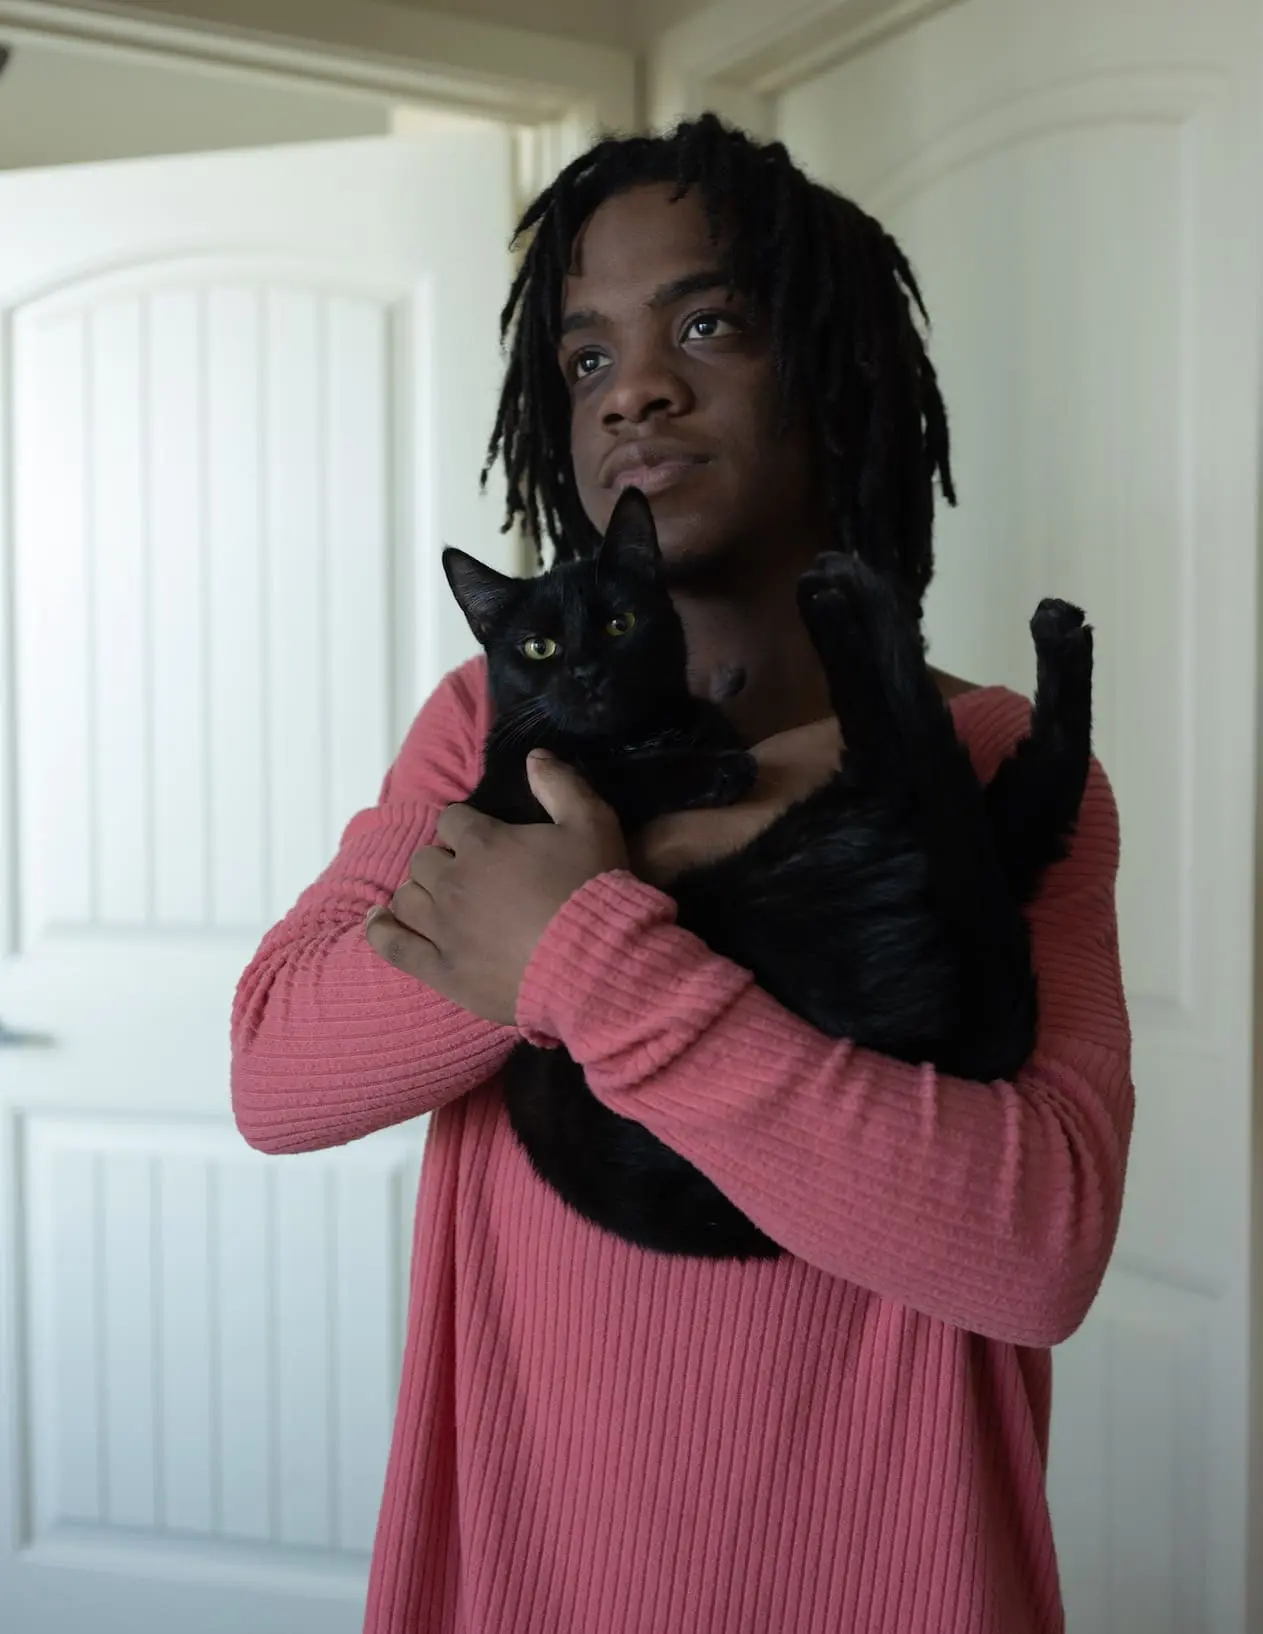 A person in a pink shirt stands, holding a black cat.